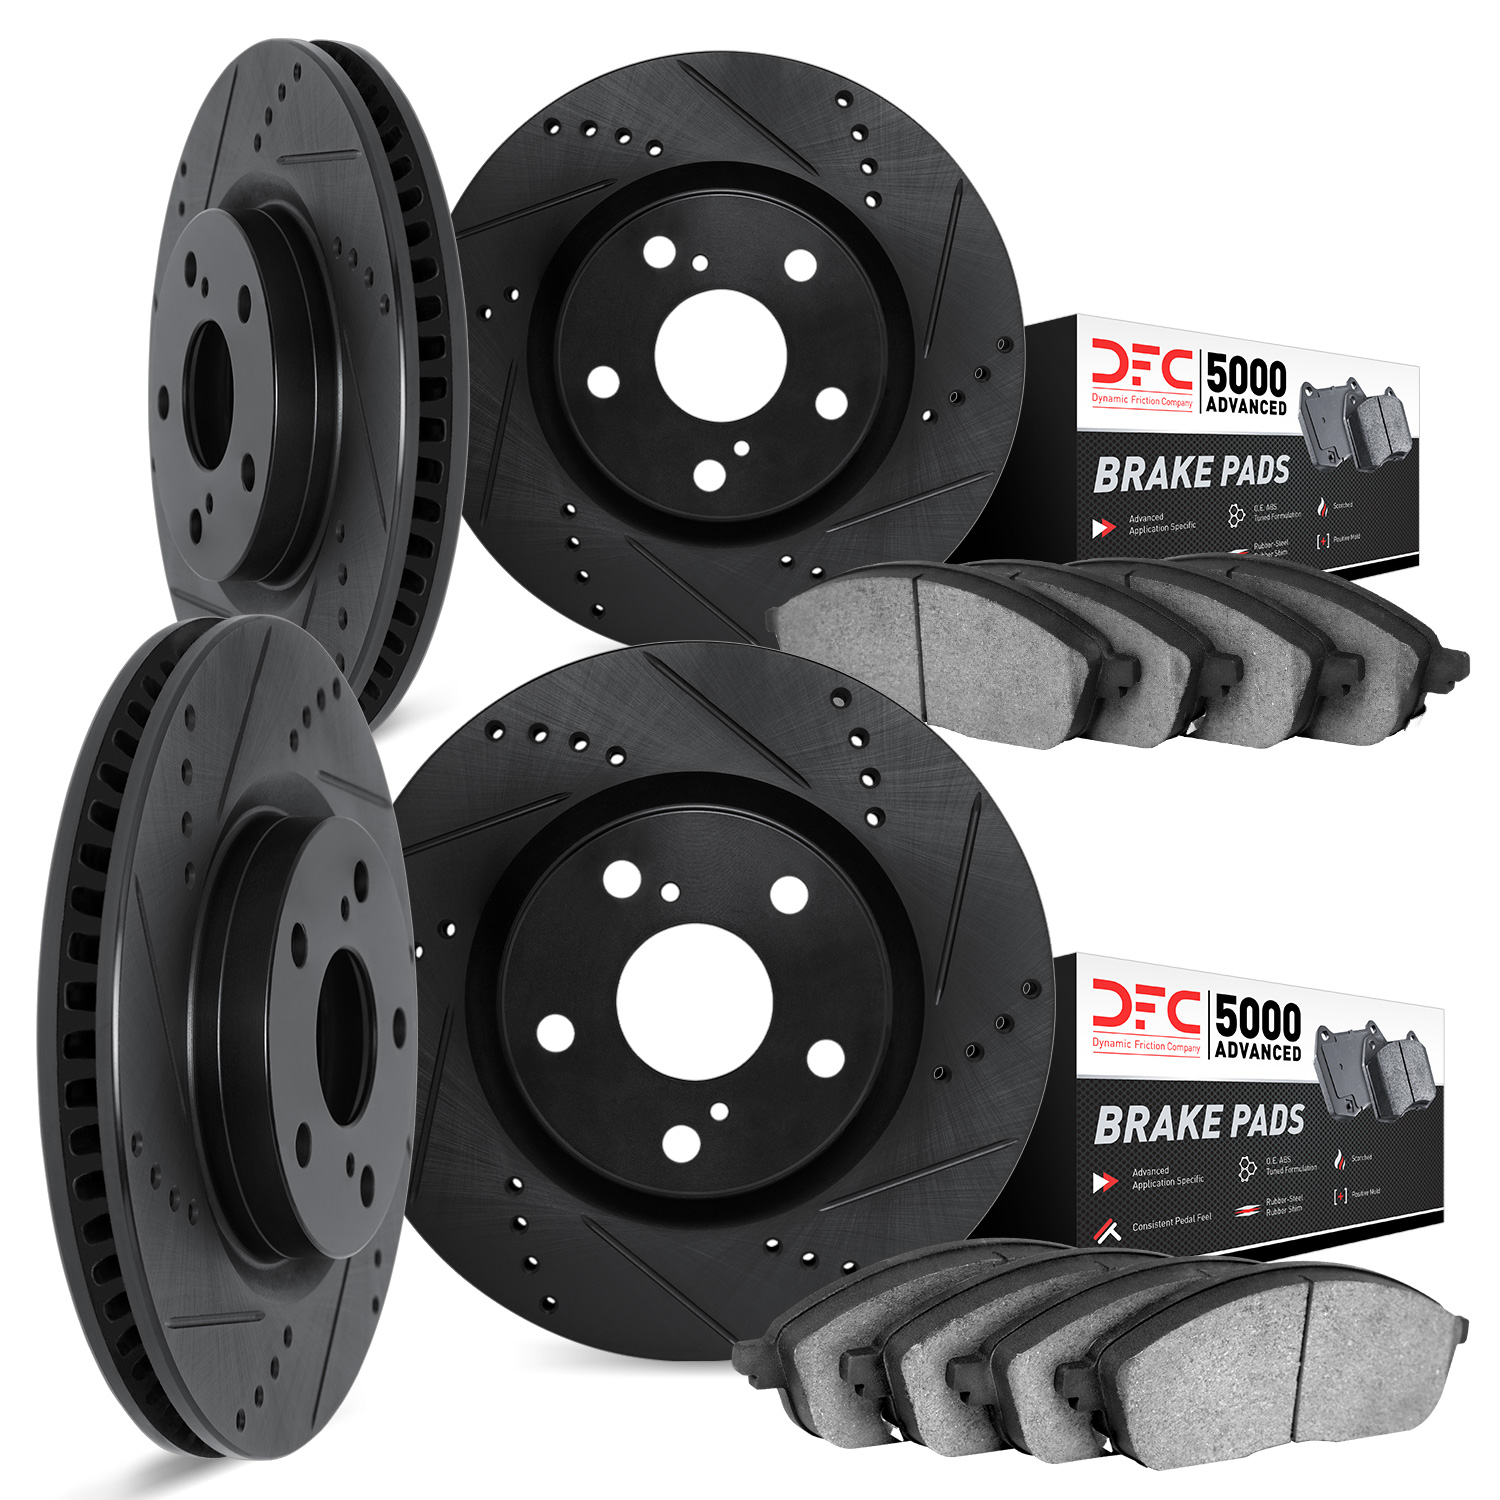 8504-65008 Drilled/Slotted Brake Rotors w/5000 Advanced Brake Pads Kit [Black], 2003-2003 GM, Position: Front and Rear